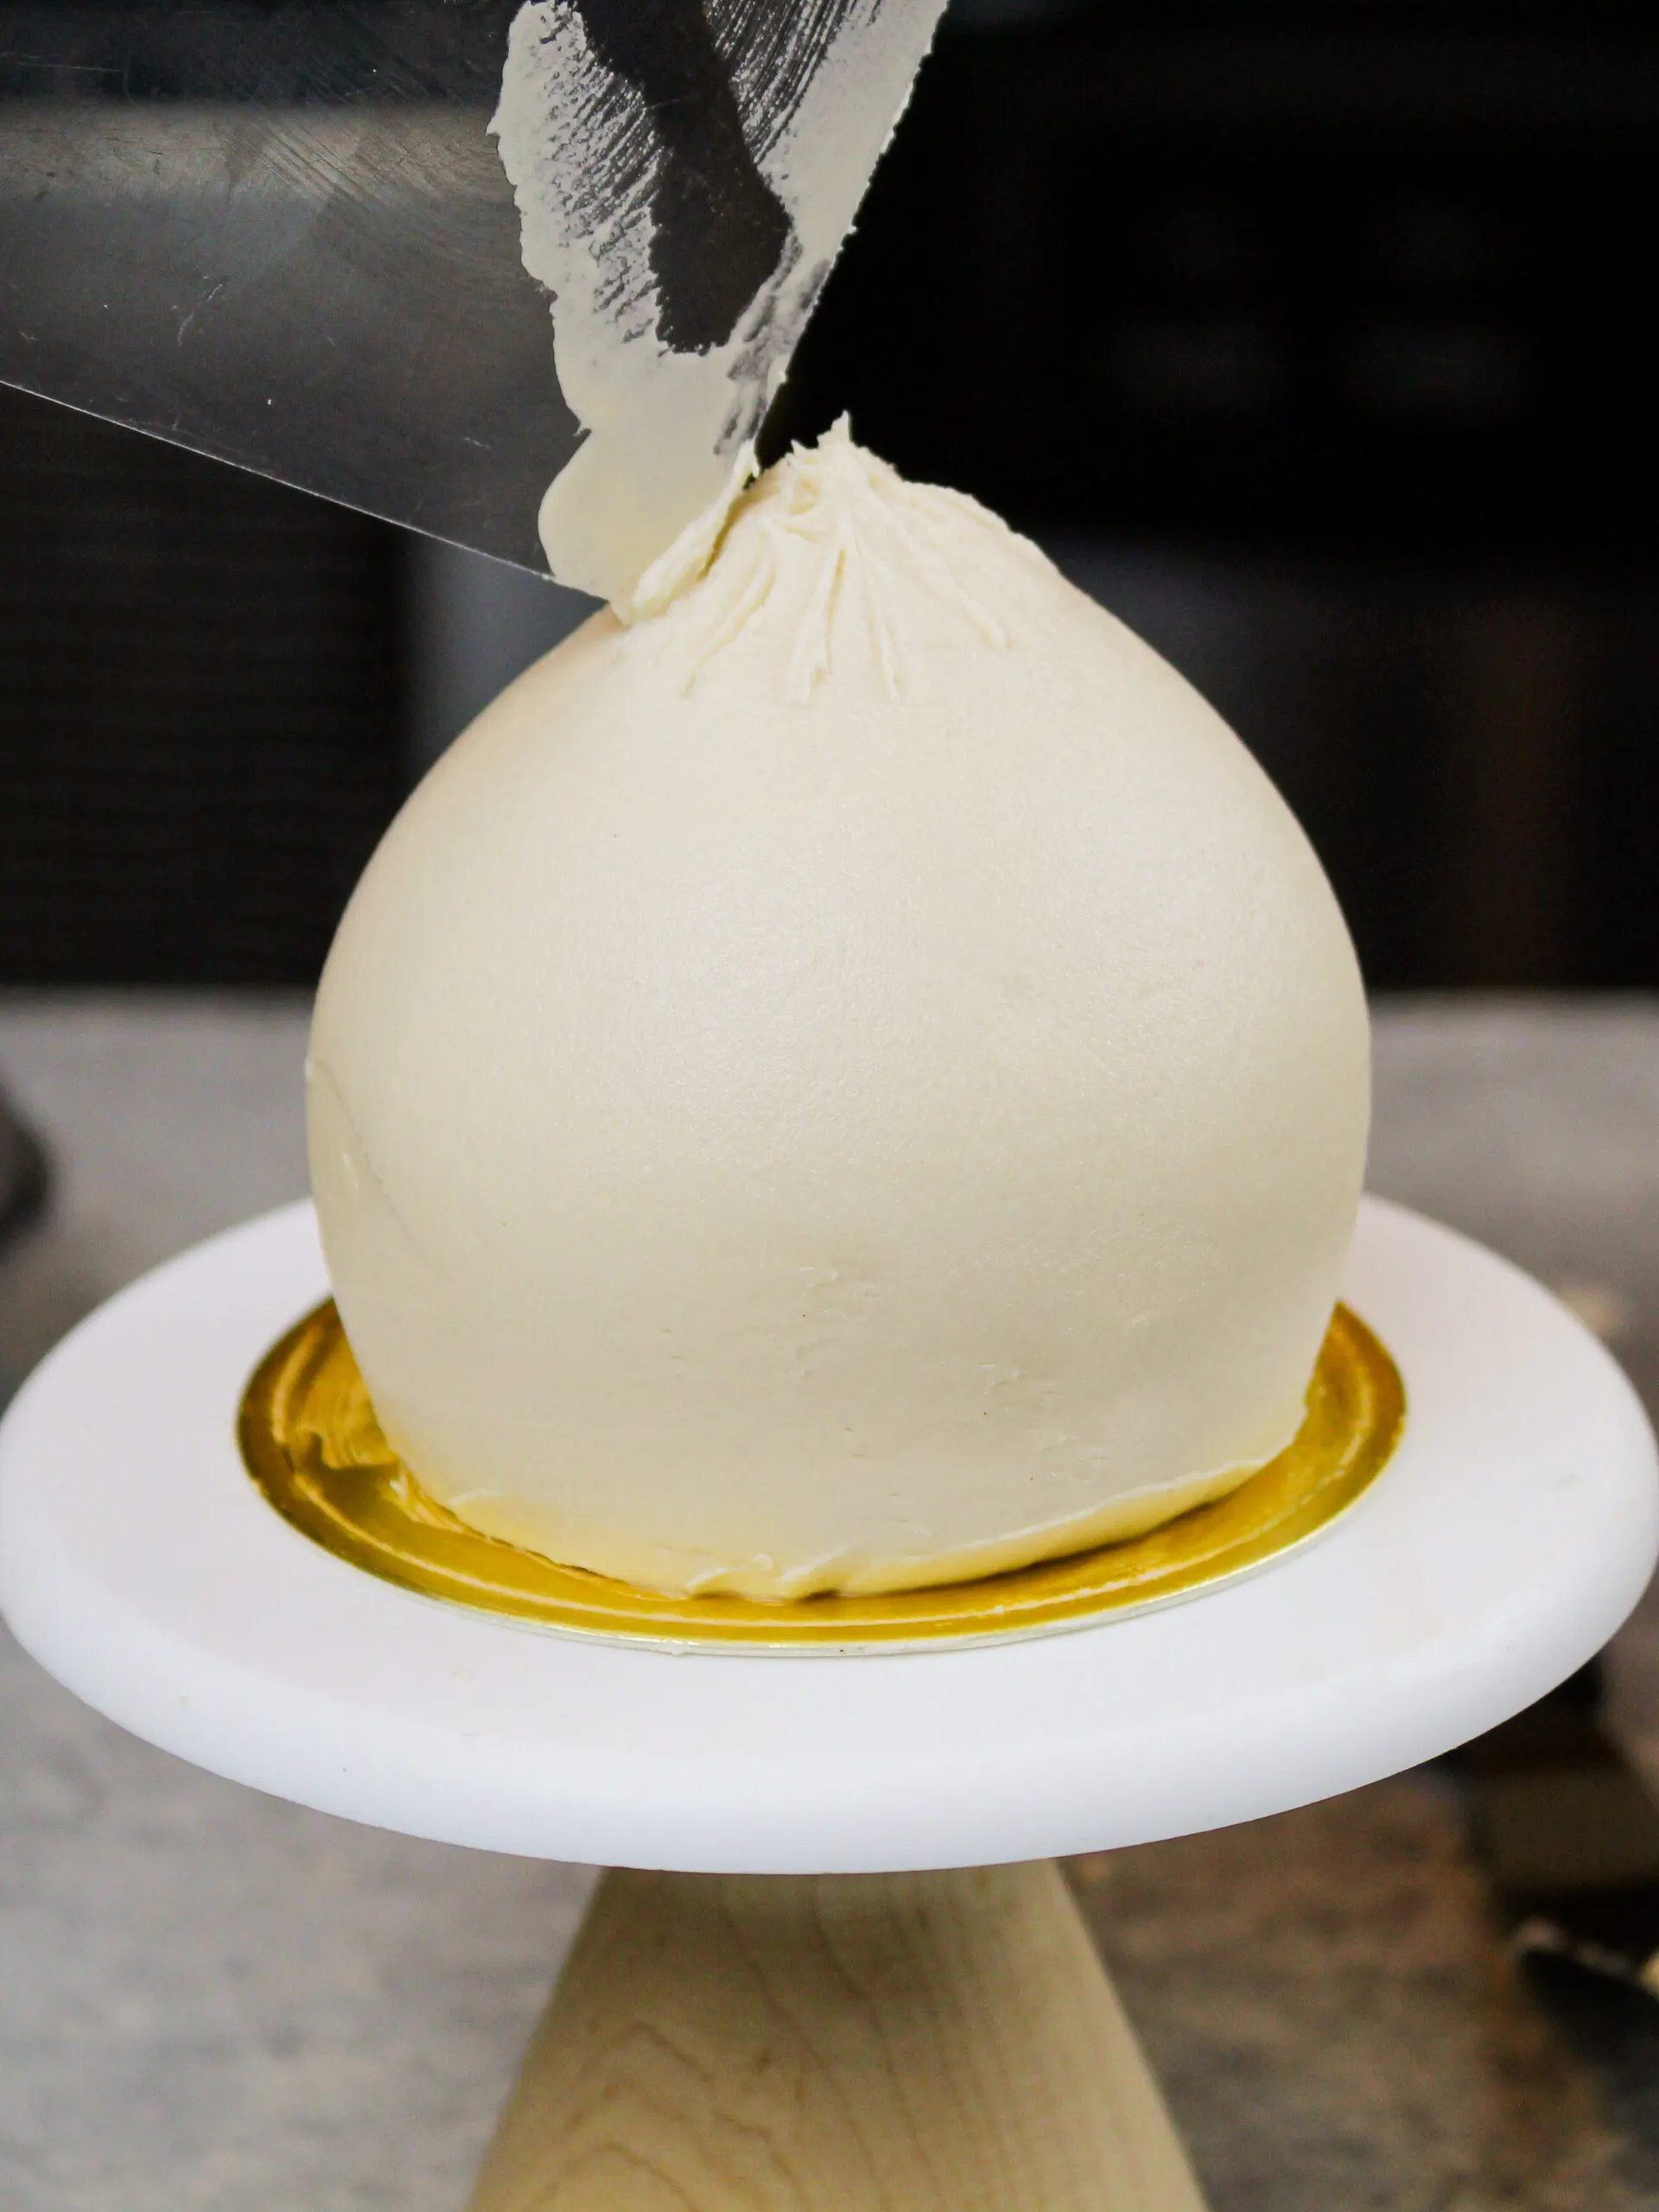 image of a dumpling cupcake being decorated with frosting and smoothed using an acetate sheet